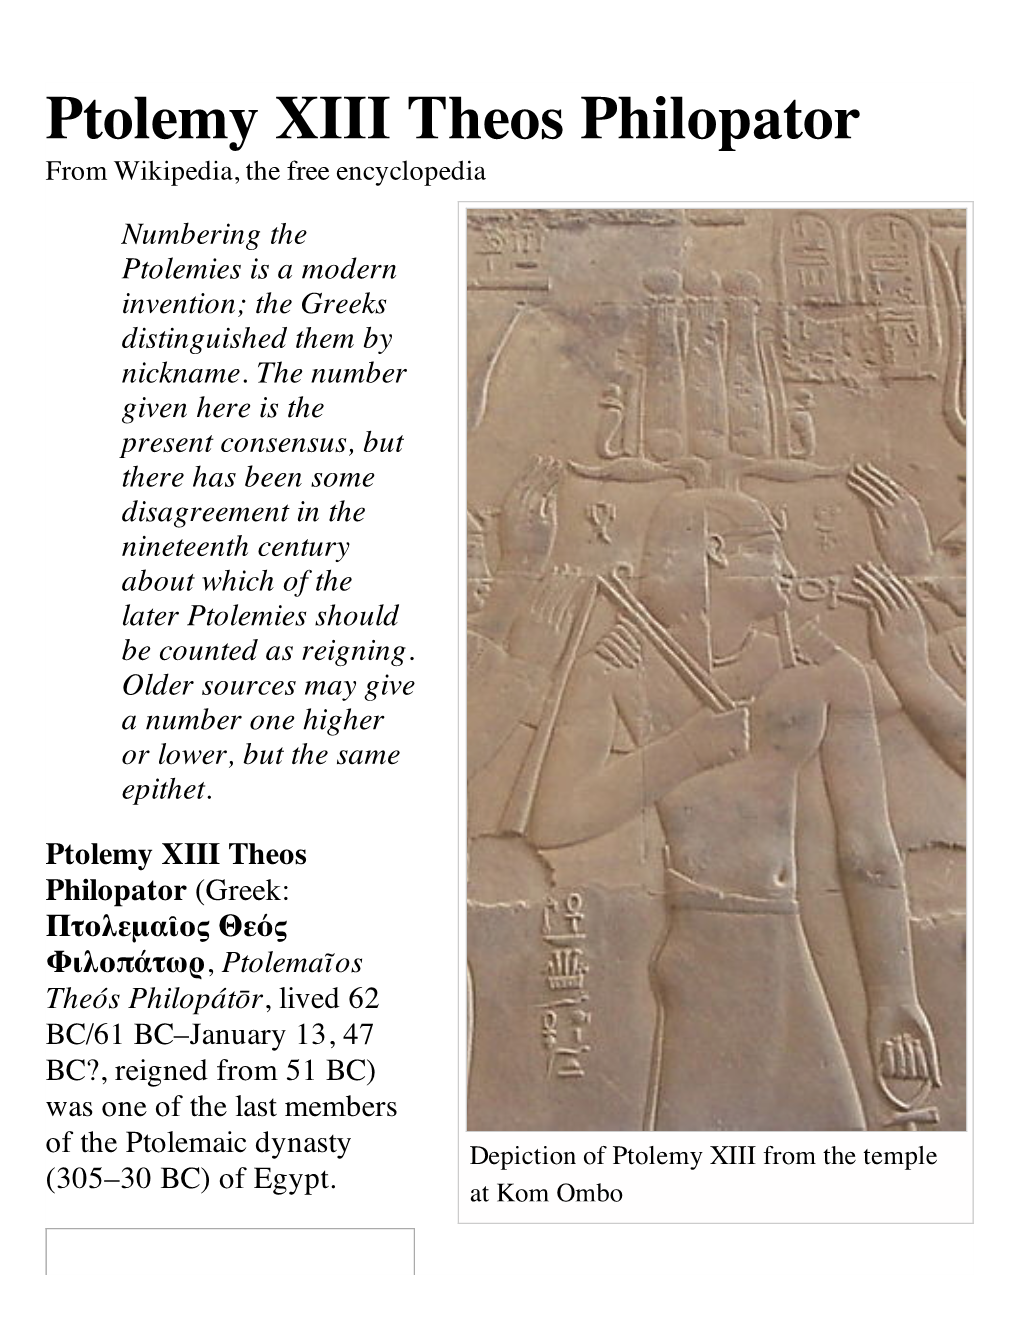 Ptolemy XIII Theos Philopator from Wikipedia, the Free Encyclopedia